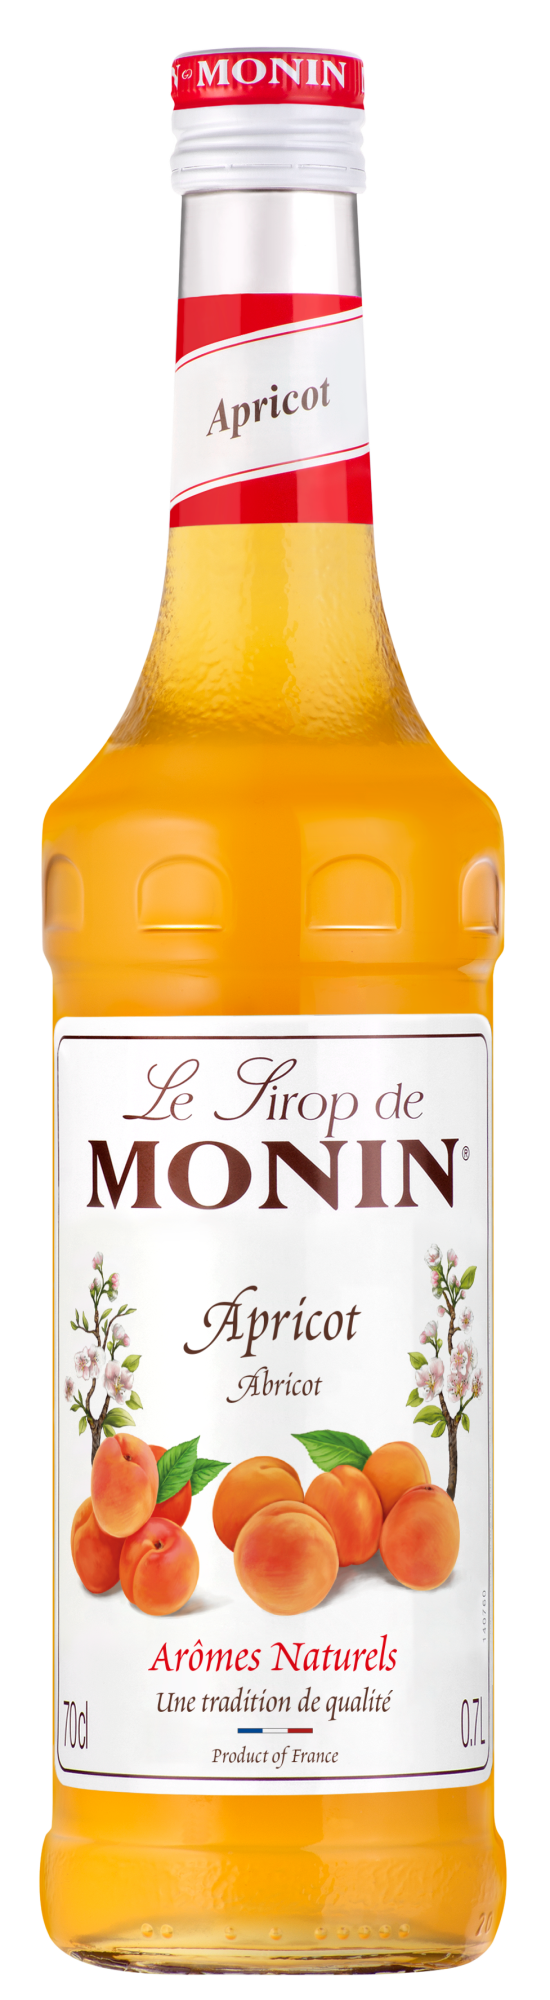 Buy MONIN Apricot Syrup. This syrup captures the juicy and soft flavour of apricots.